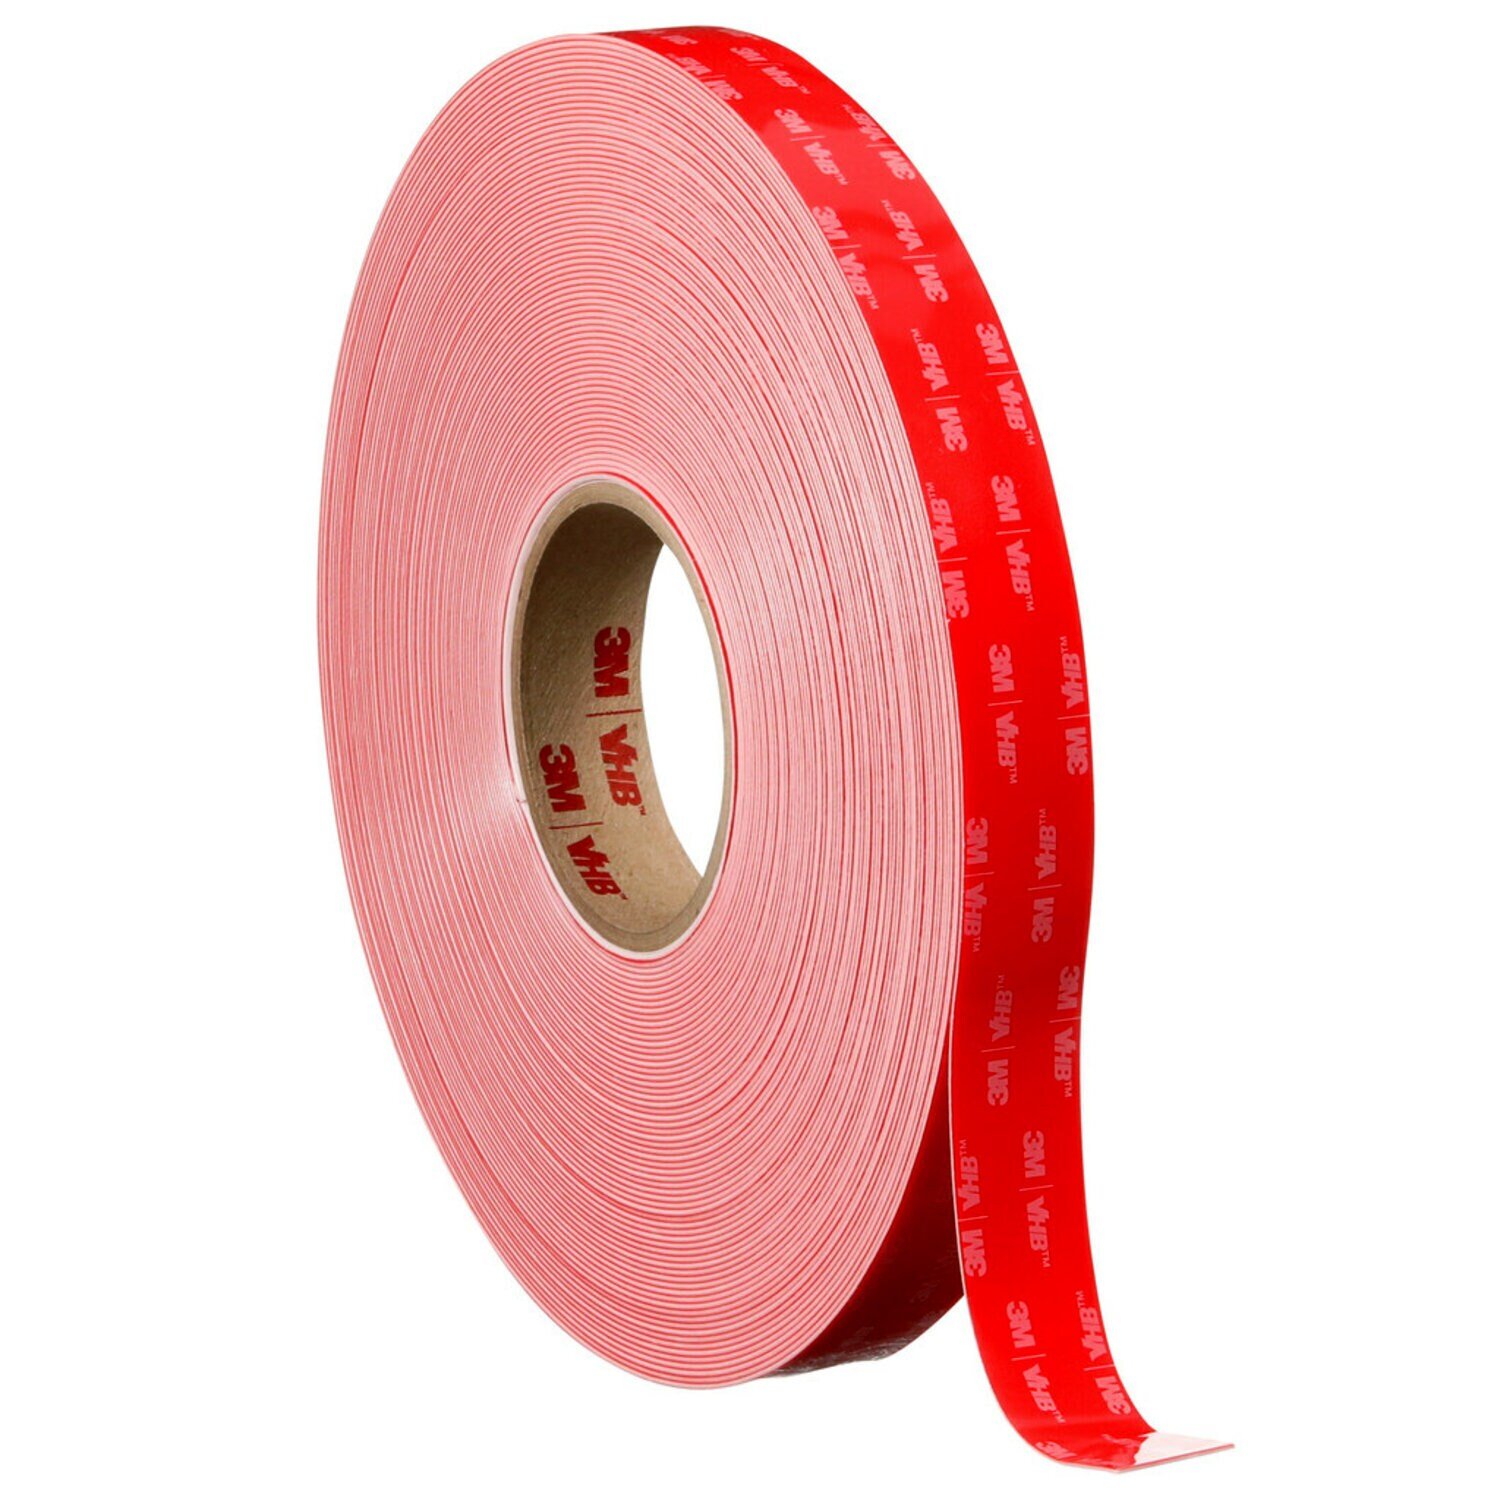 3M VHB Tape Universal Primer UV for plastic, metal, glass and painted  surfaces